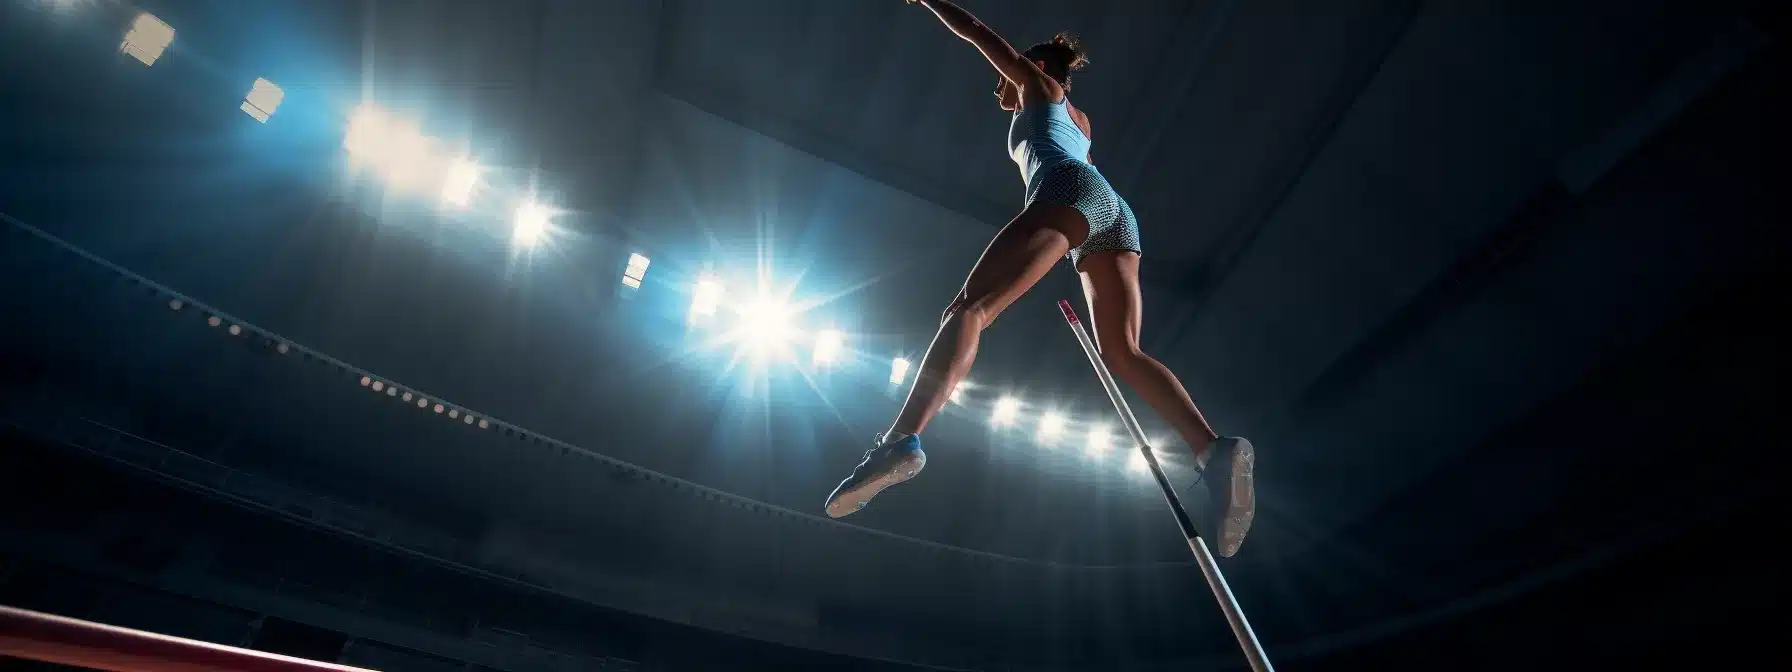 A Person Confidently Pole Vaulting Over A High Bar And Landing Gracefully On A Target Mat.